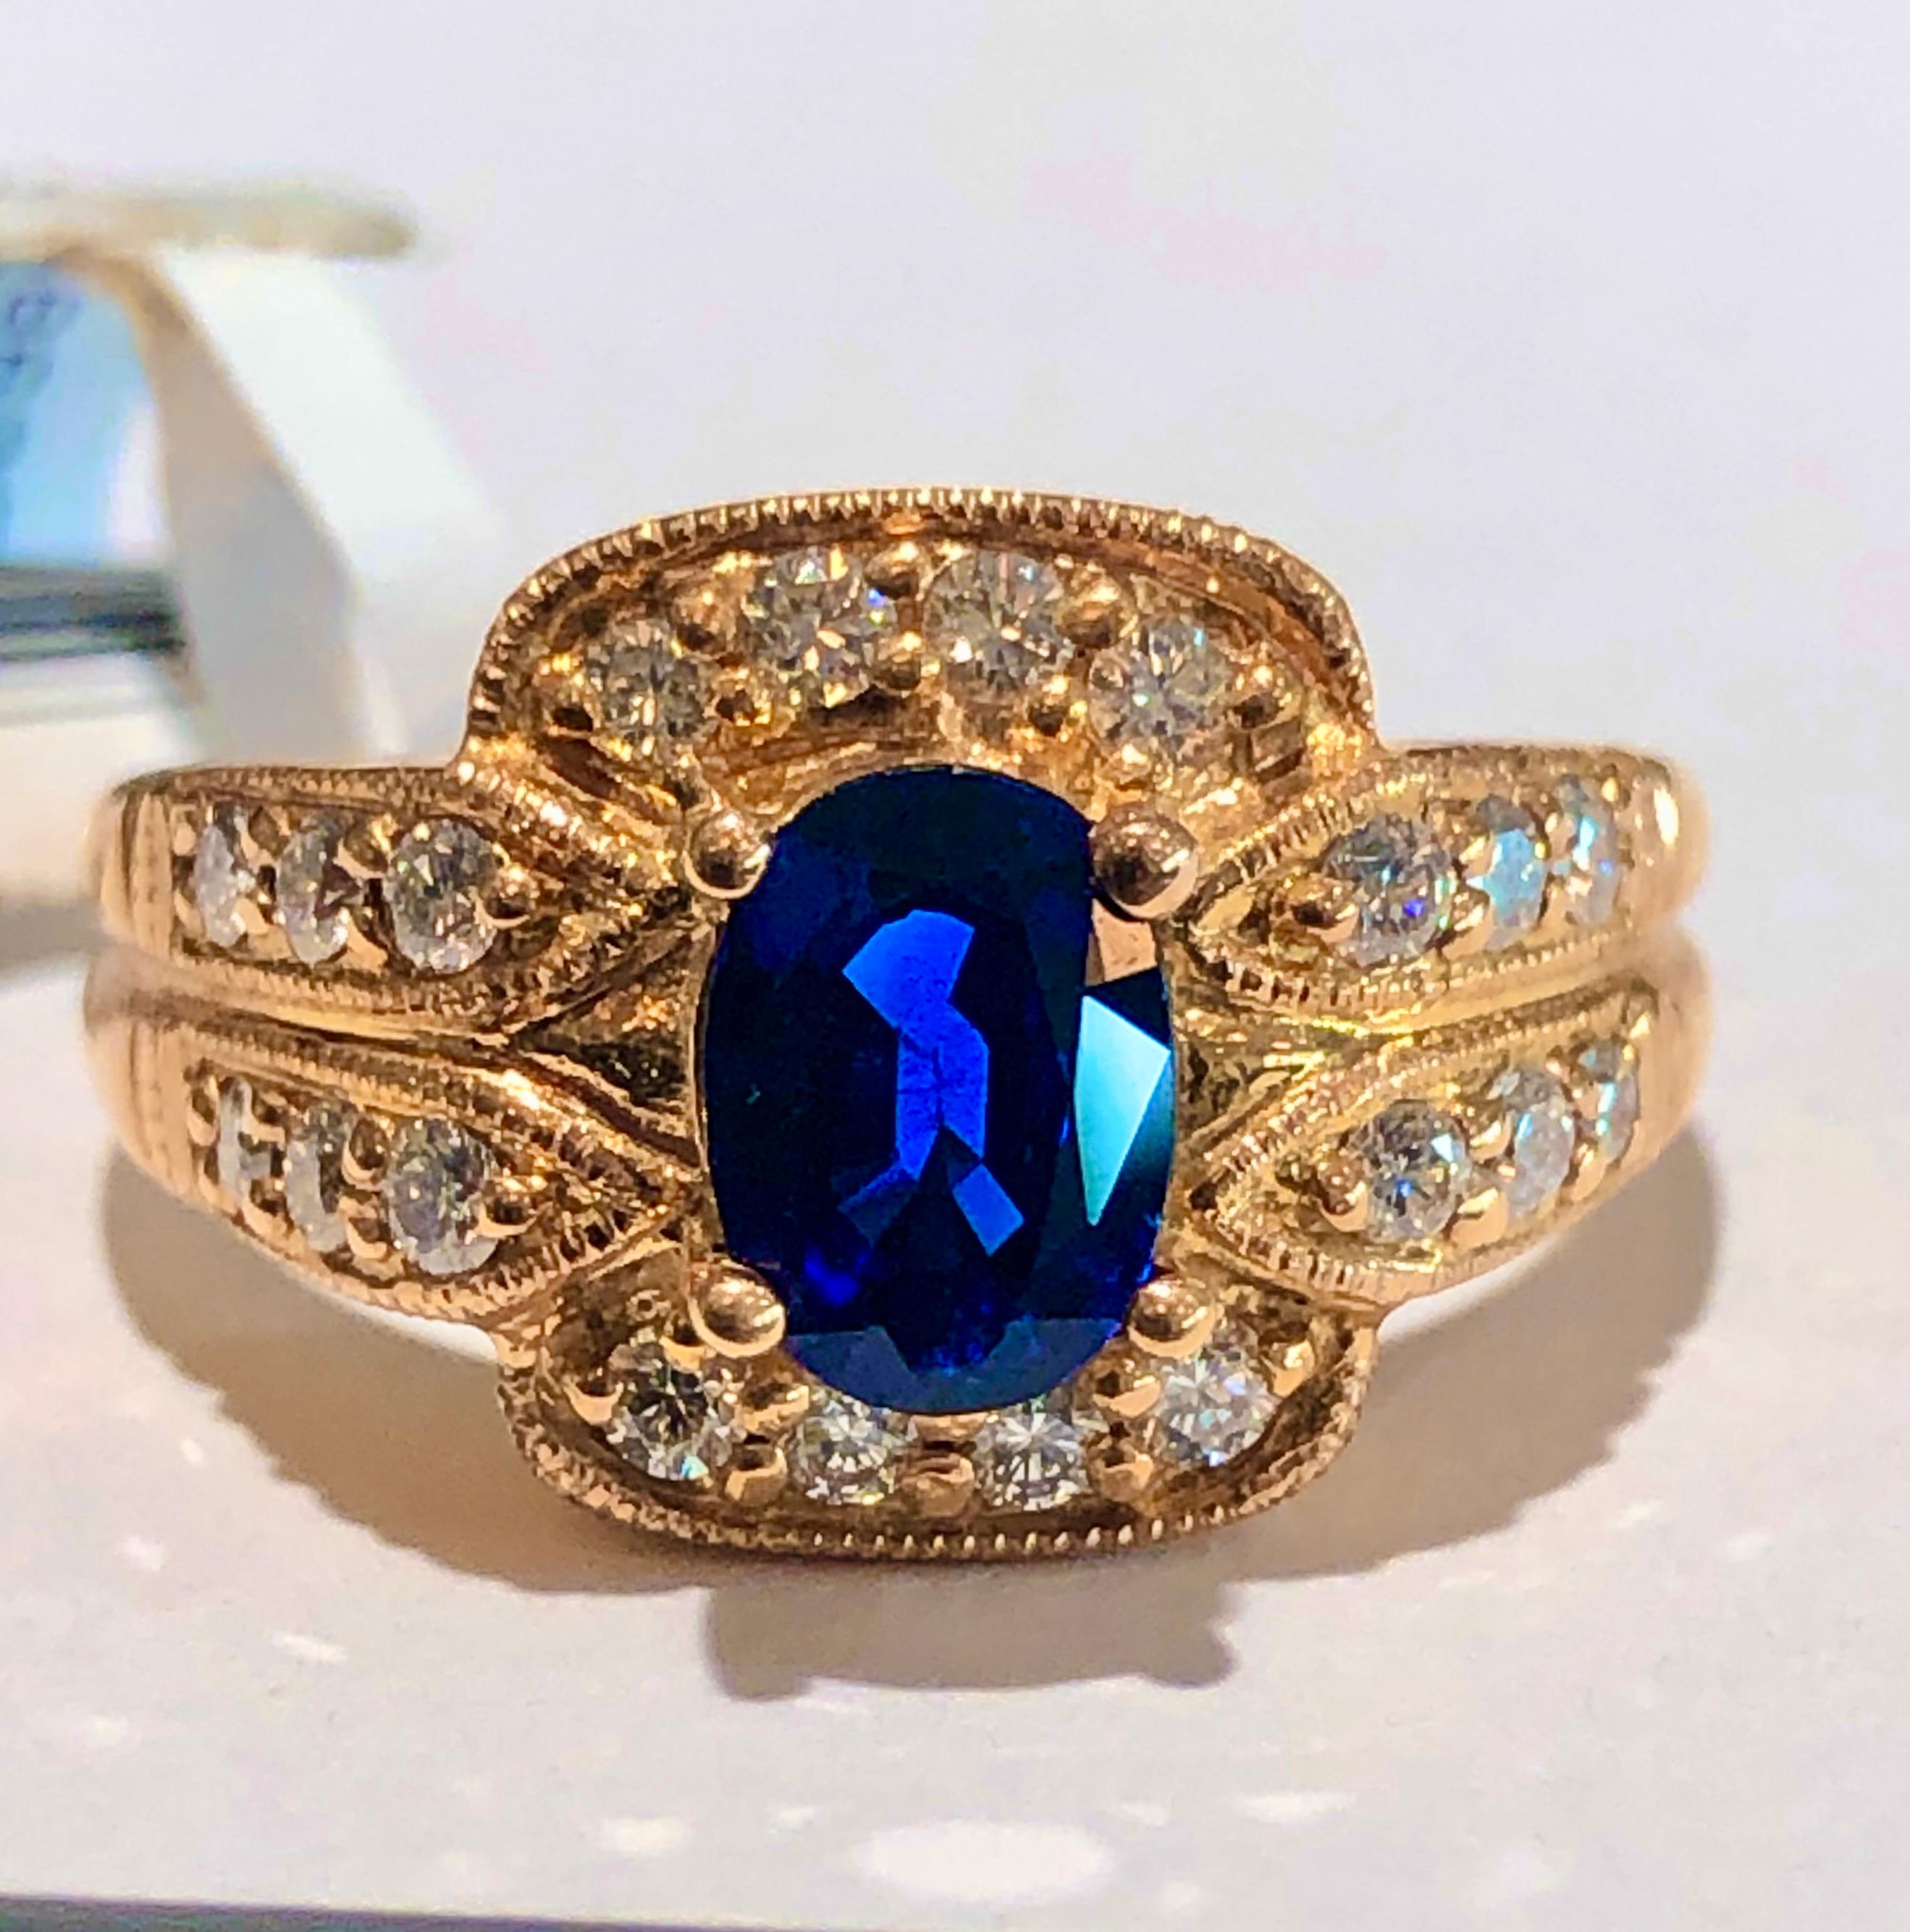 1.55 Carat Royal Blue sapphire and Diamonds Ring 18K Rose Gold
Stunning Cocktail Ring centering a 1.12 Carat Natural Royal Blue sapphire and 0.42 Carat Rond Brilliant Cut Diamonds G-VS.
Ring size 6
7.0g 18K Rose Gold